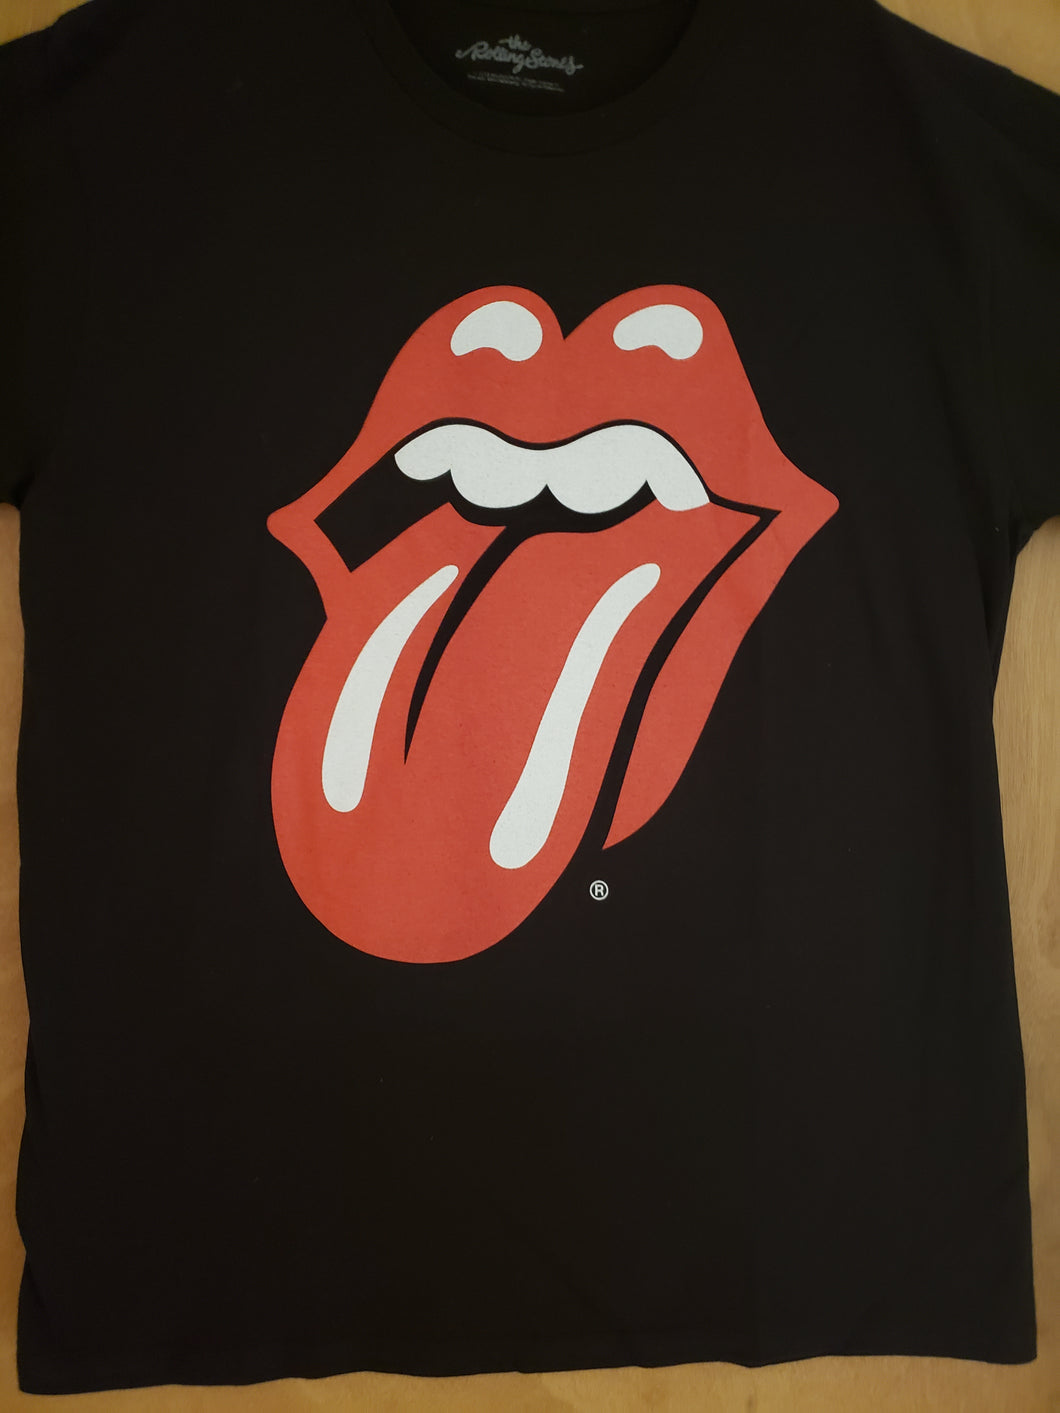 THE ROLLING STONES T-SHIRT BRAND NEW EXTRA LARGE